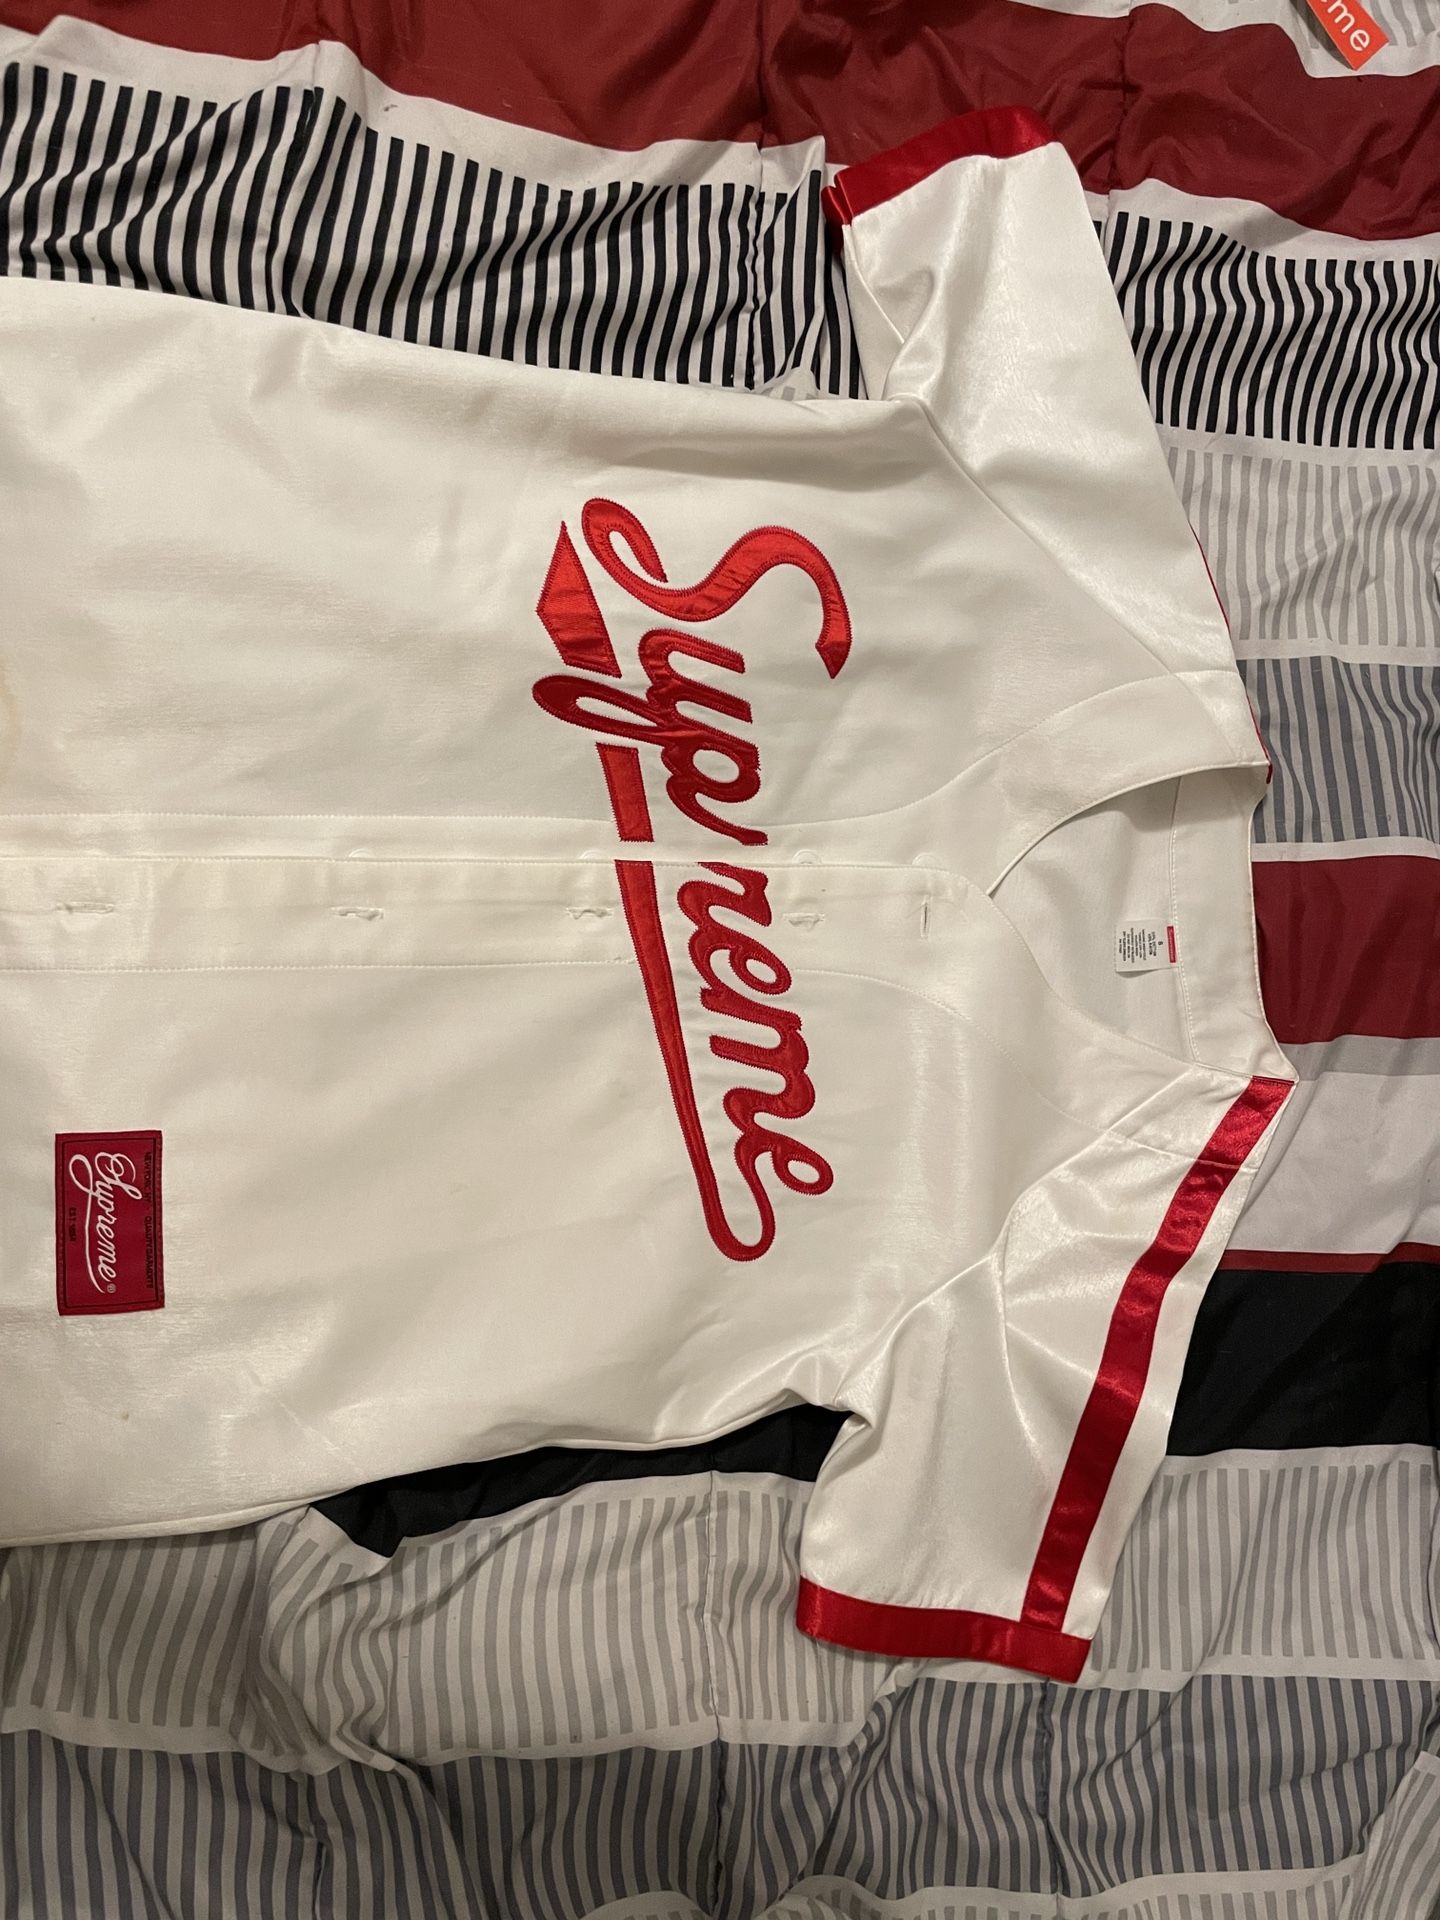 Supreme Satin Spell Out Baseball Jersey Men’s small White/ Red Open Front Shirt. black supreme Louis Vuitton shirt with tag. Located in Allen tx. OBO 